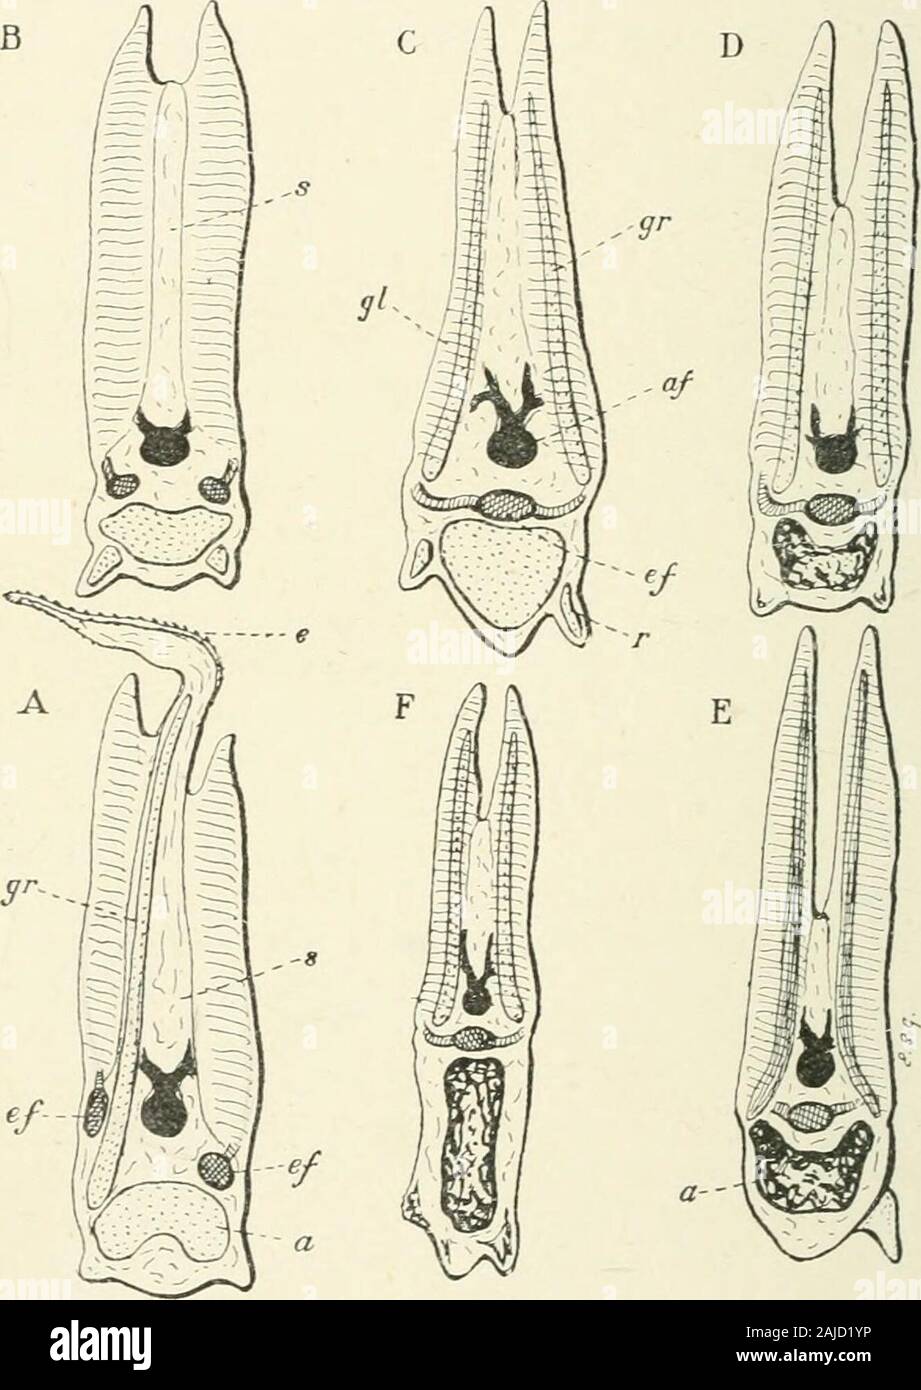 A treatise on zoology . grou2)ed in an anterior row on the posterior face of onebar, and a posterior row on the anterior face of the next bar (Fig.26), each complete gill is said to consist of two hemibranchs.. Fig. 57. Sections across the gill-arch of A, Mustelus ; B, Ceratodus; C, Acipeiiser; D, Lepidosteus;E, Salmo ; F, Poli/pterus. a, skeletal arch ; af, afferent artery (black); e, septum reachingexternal surface ; ef, efferent artery (cross hatched); g.l, gill-lamellae ; g.r, snp])orting gill-ray ;r, gill-raker ; s, septum, largest in A, and smallest in E. Anterior lamellae to the right. Stock Photo